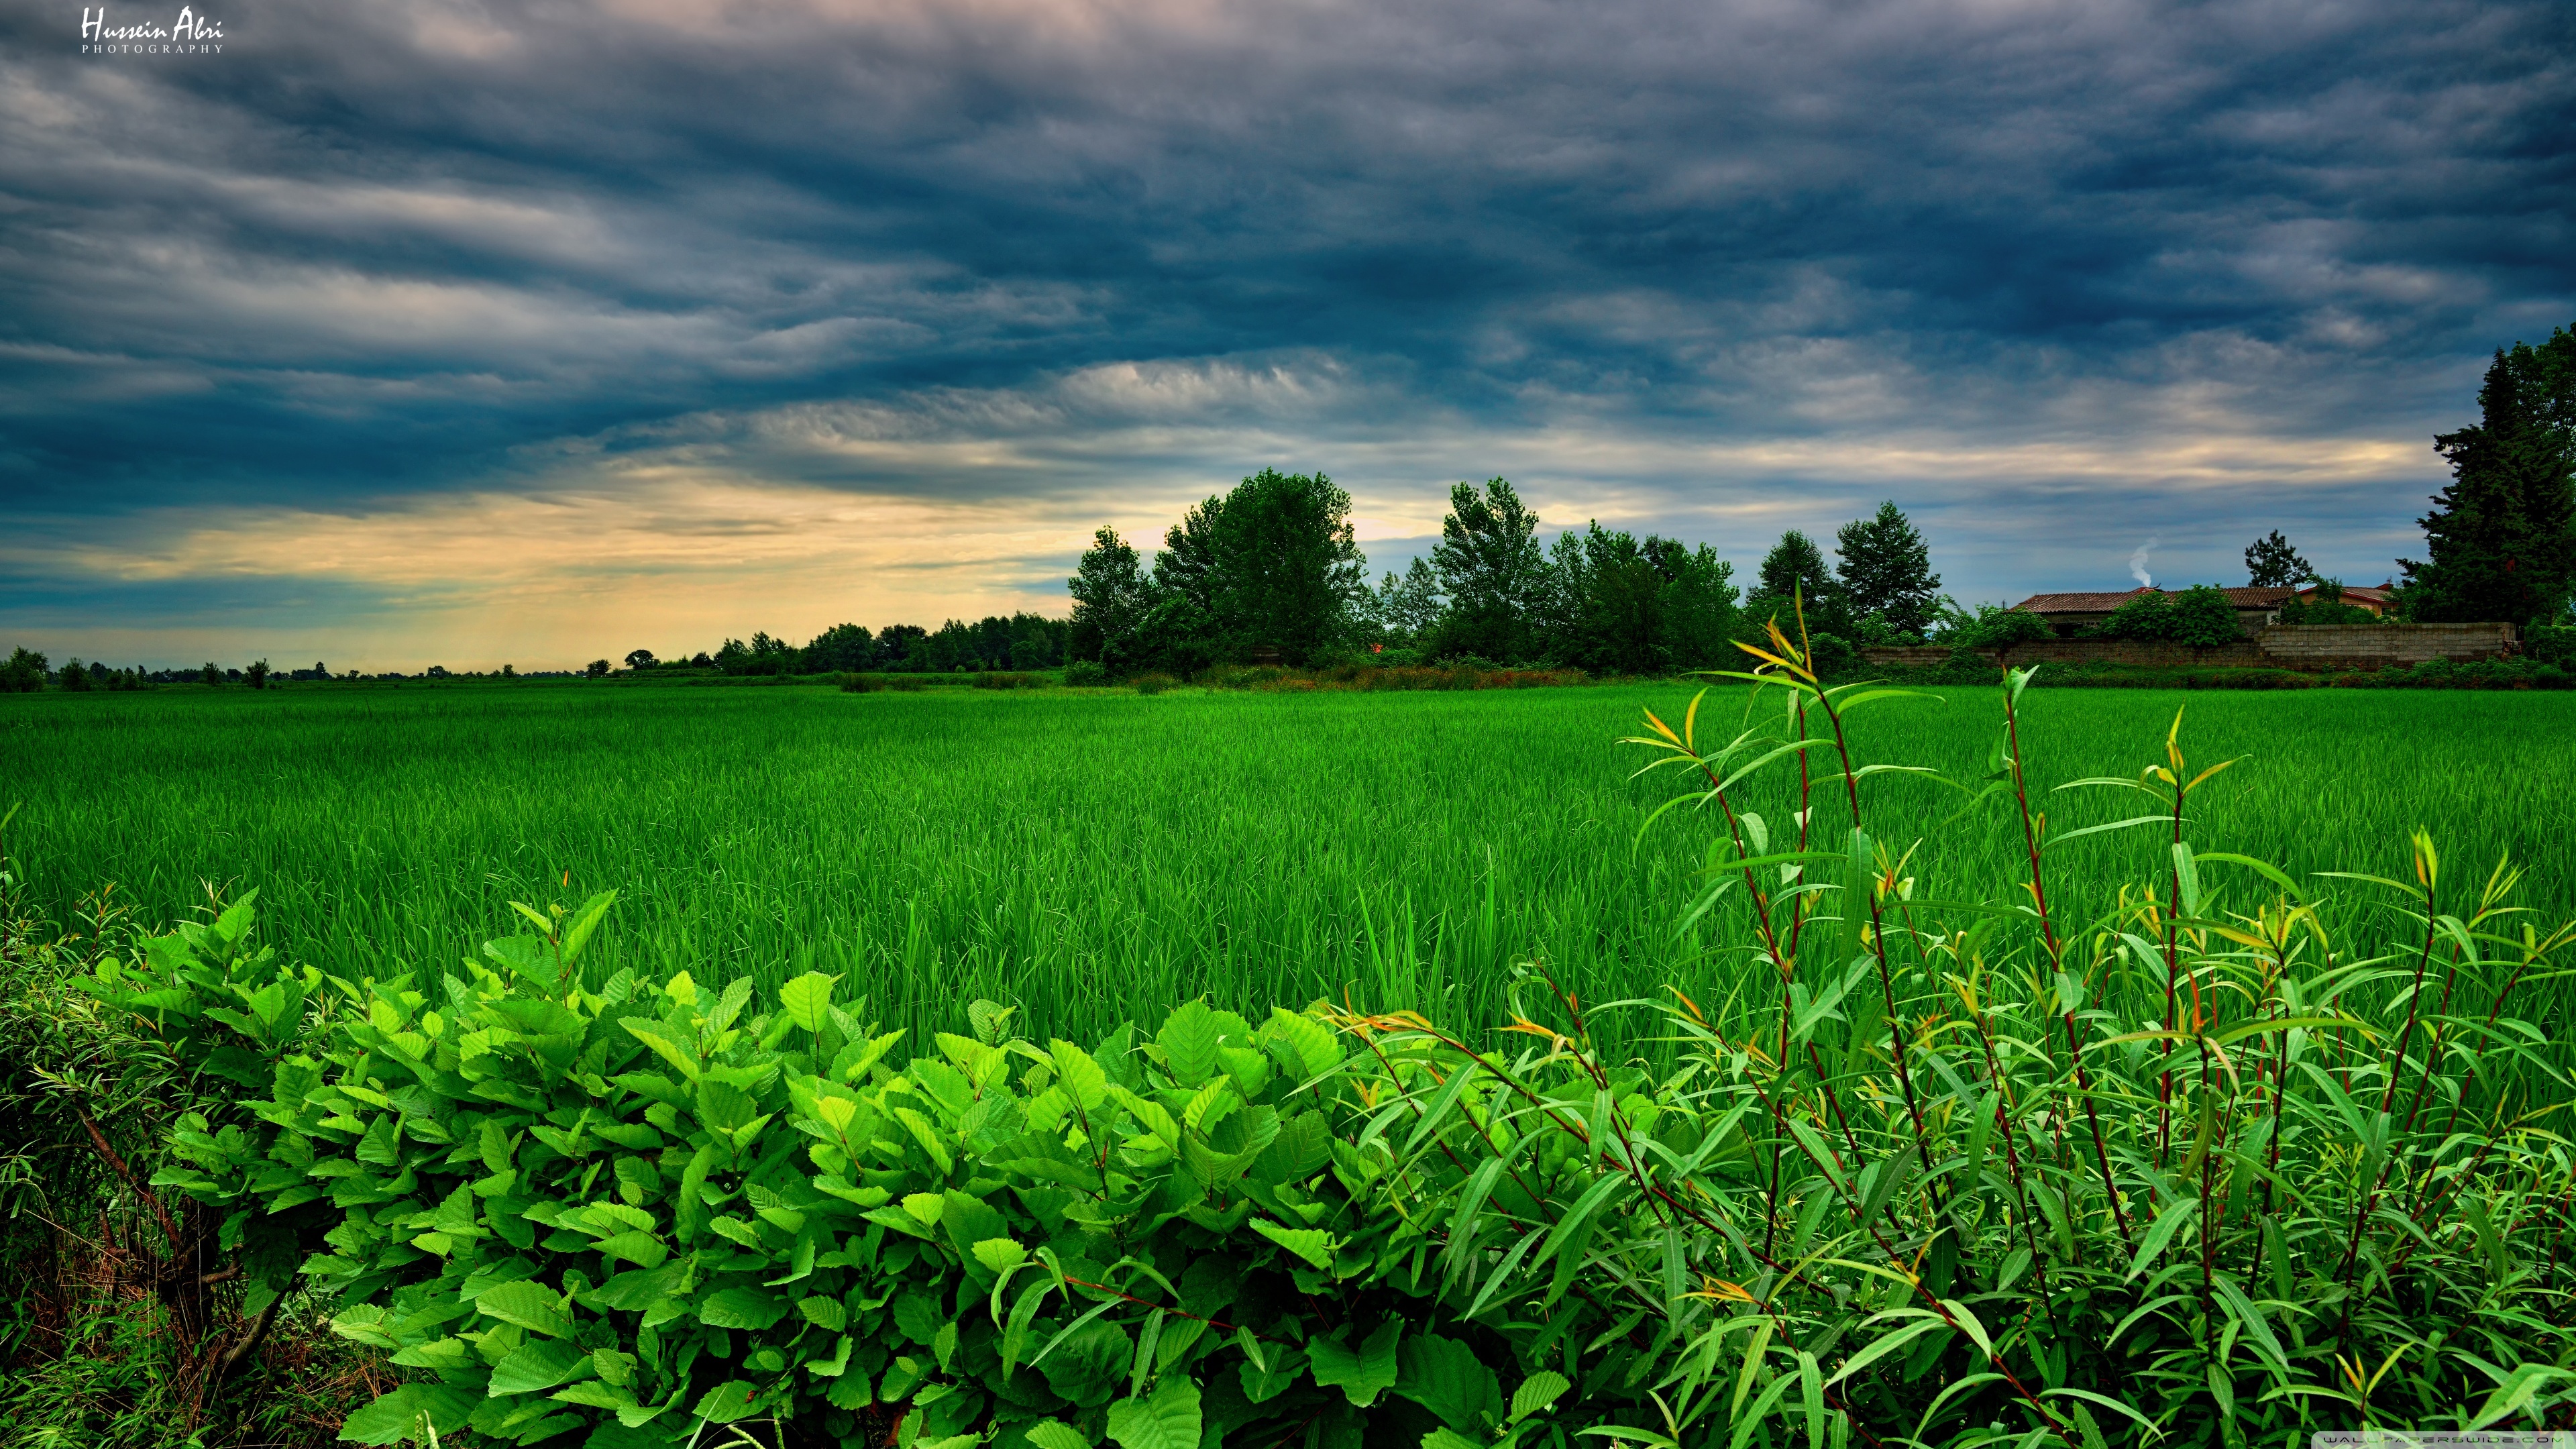 Stormy Clouds over Green Field wallpaper  nature and landscape  Wallpaper Better